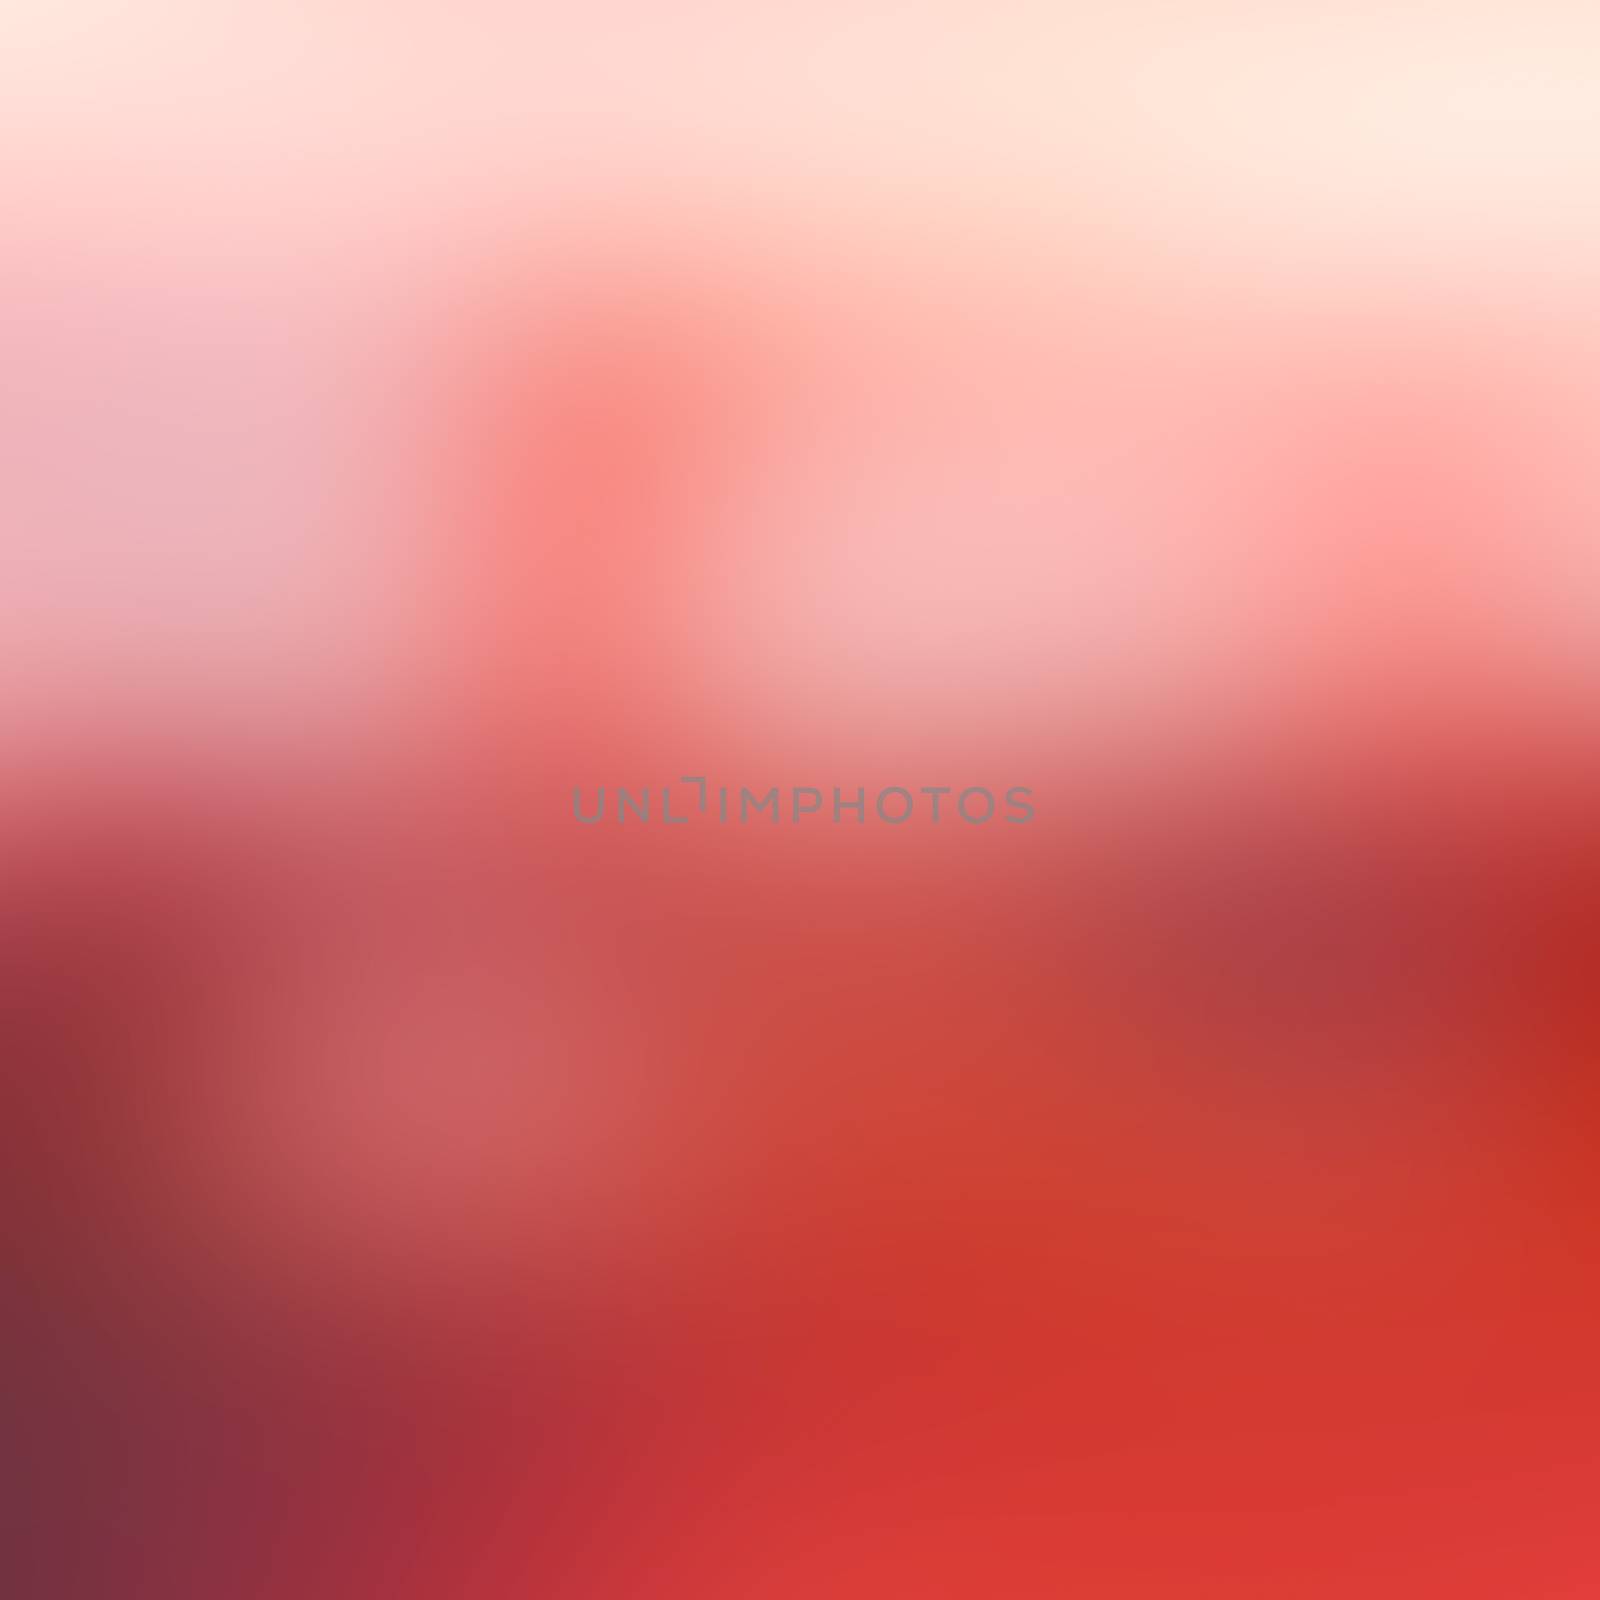 Abstract red nature soft blurred background. Canvas for any project